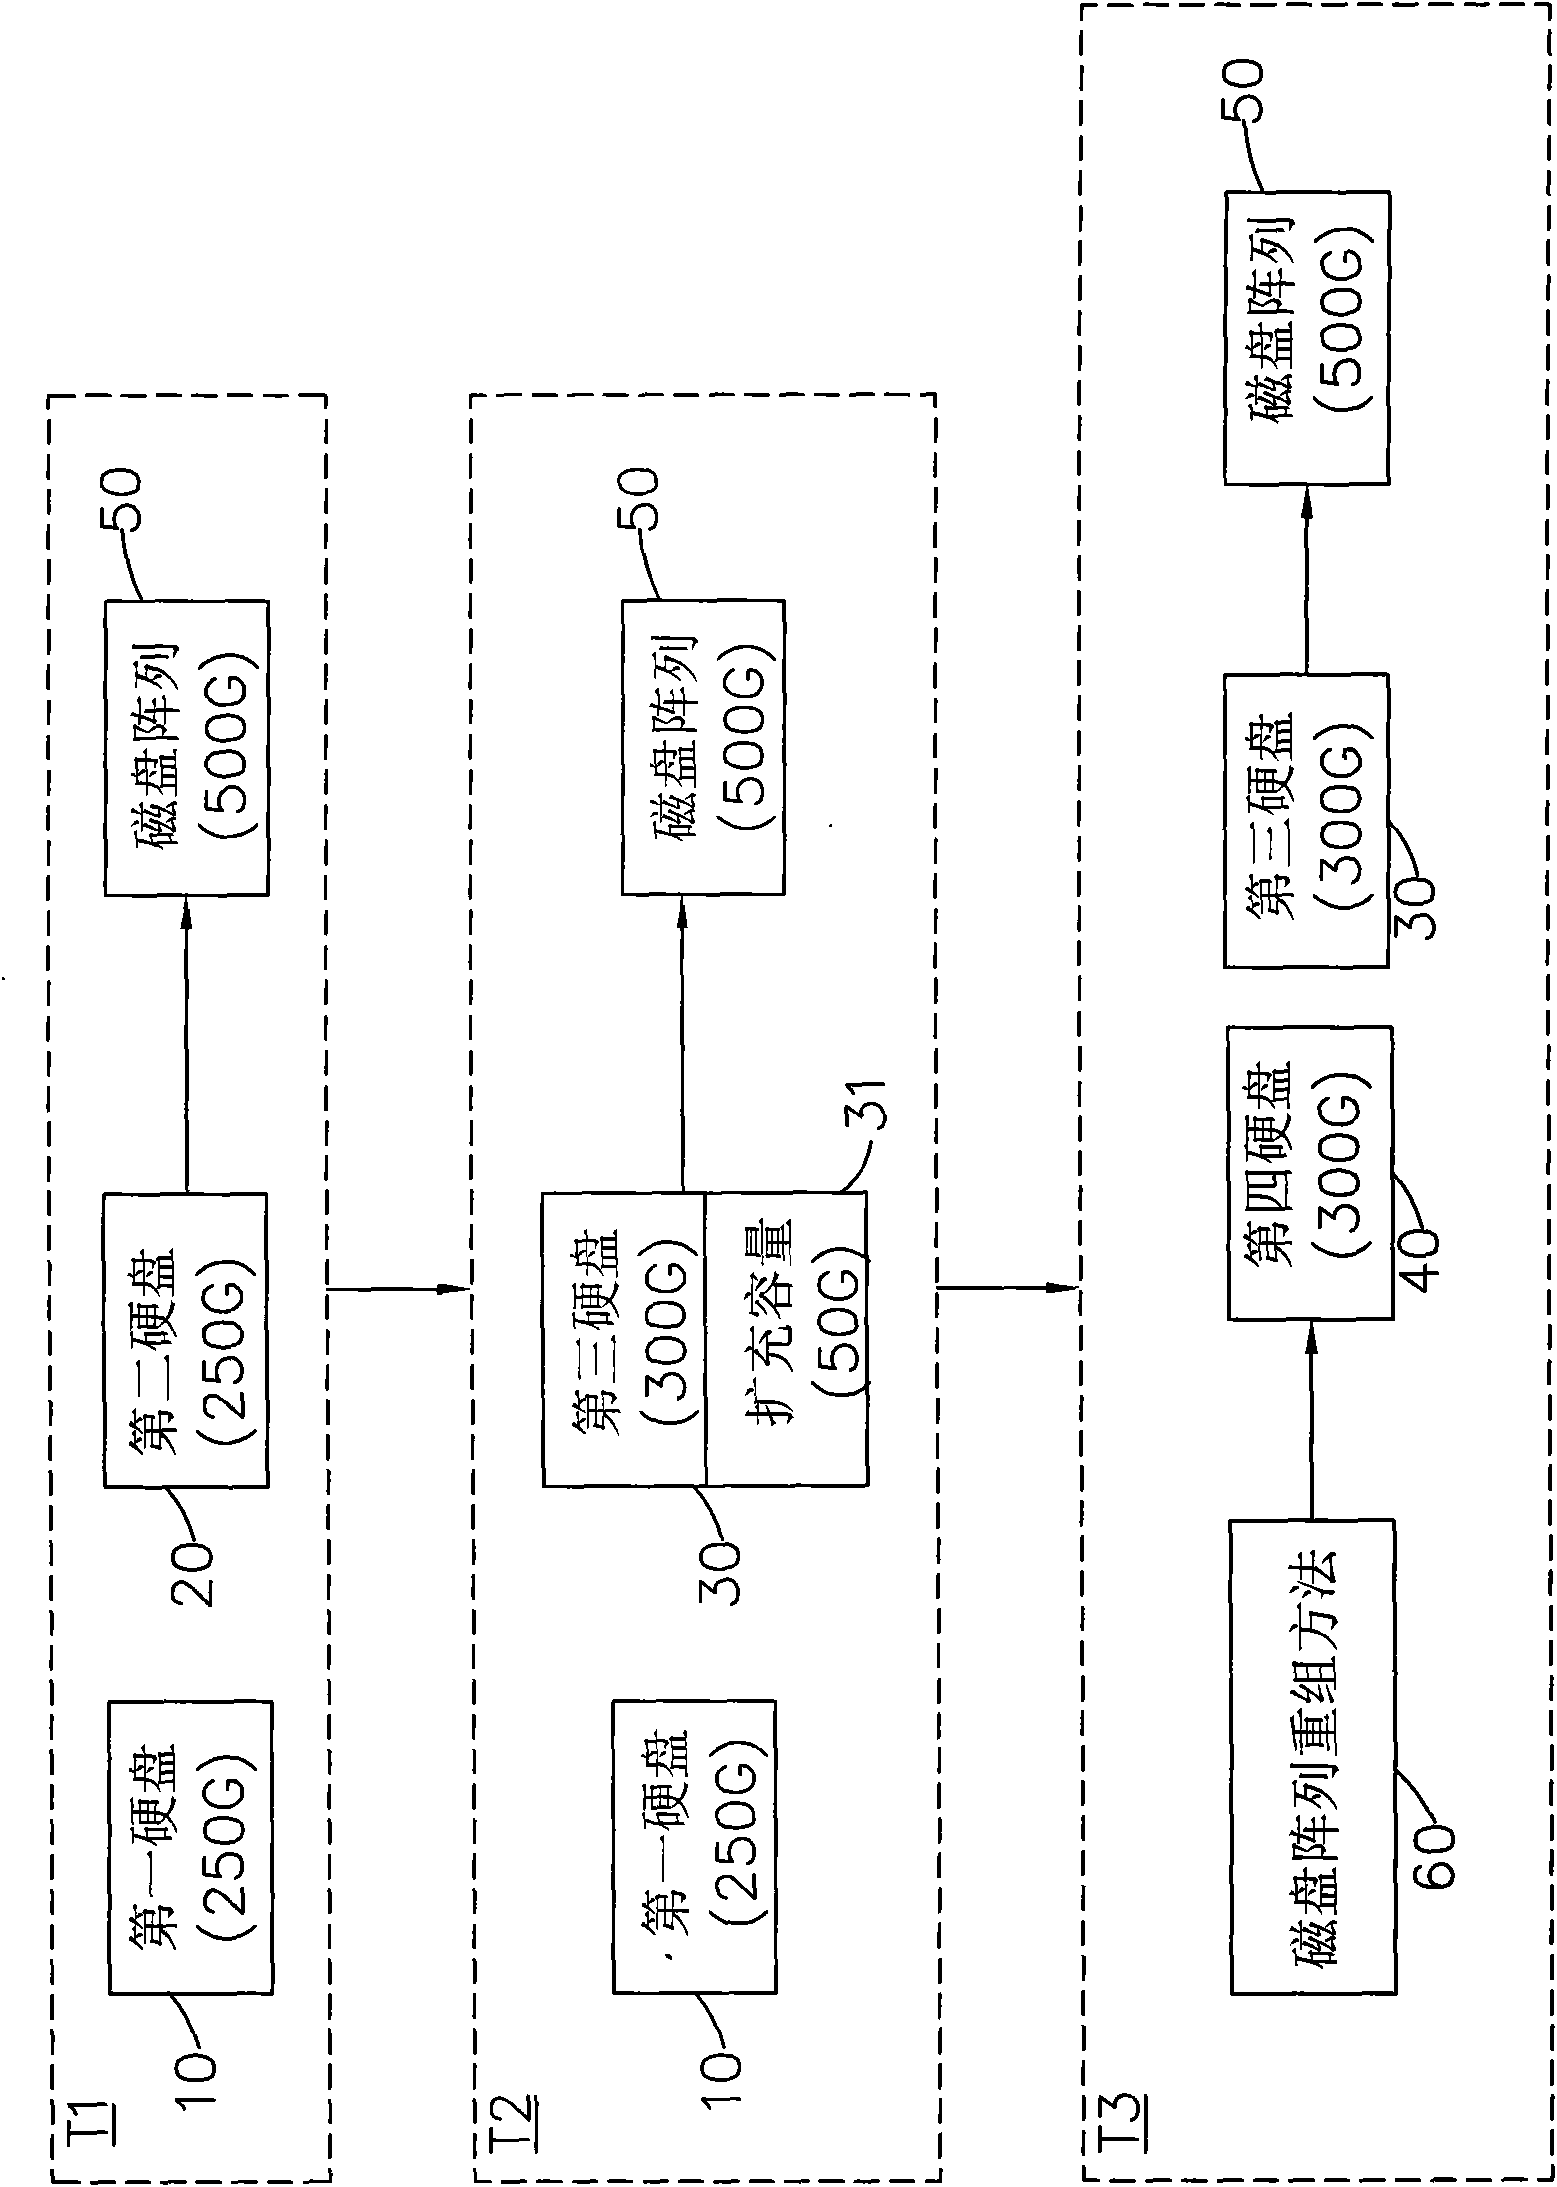 Method for reconstructing disk array